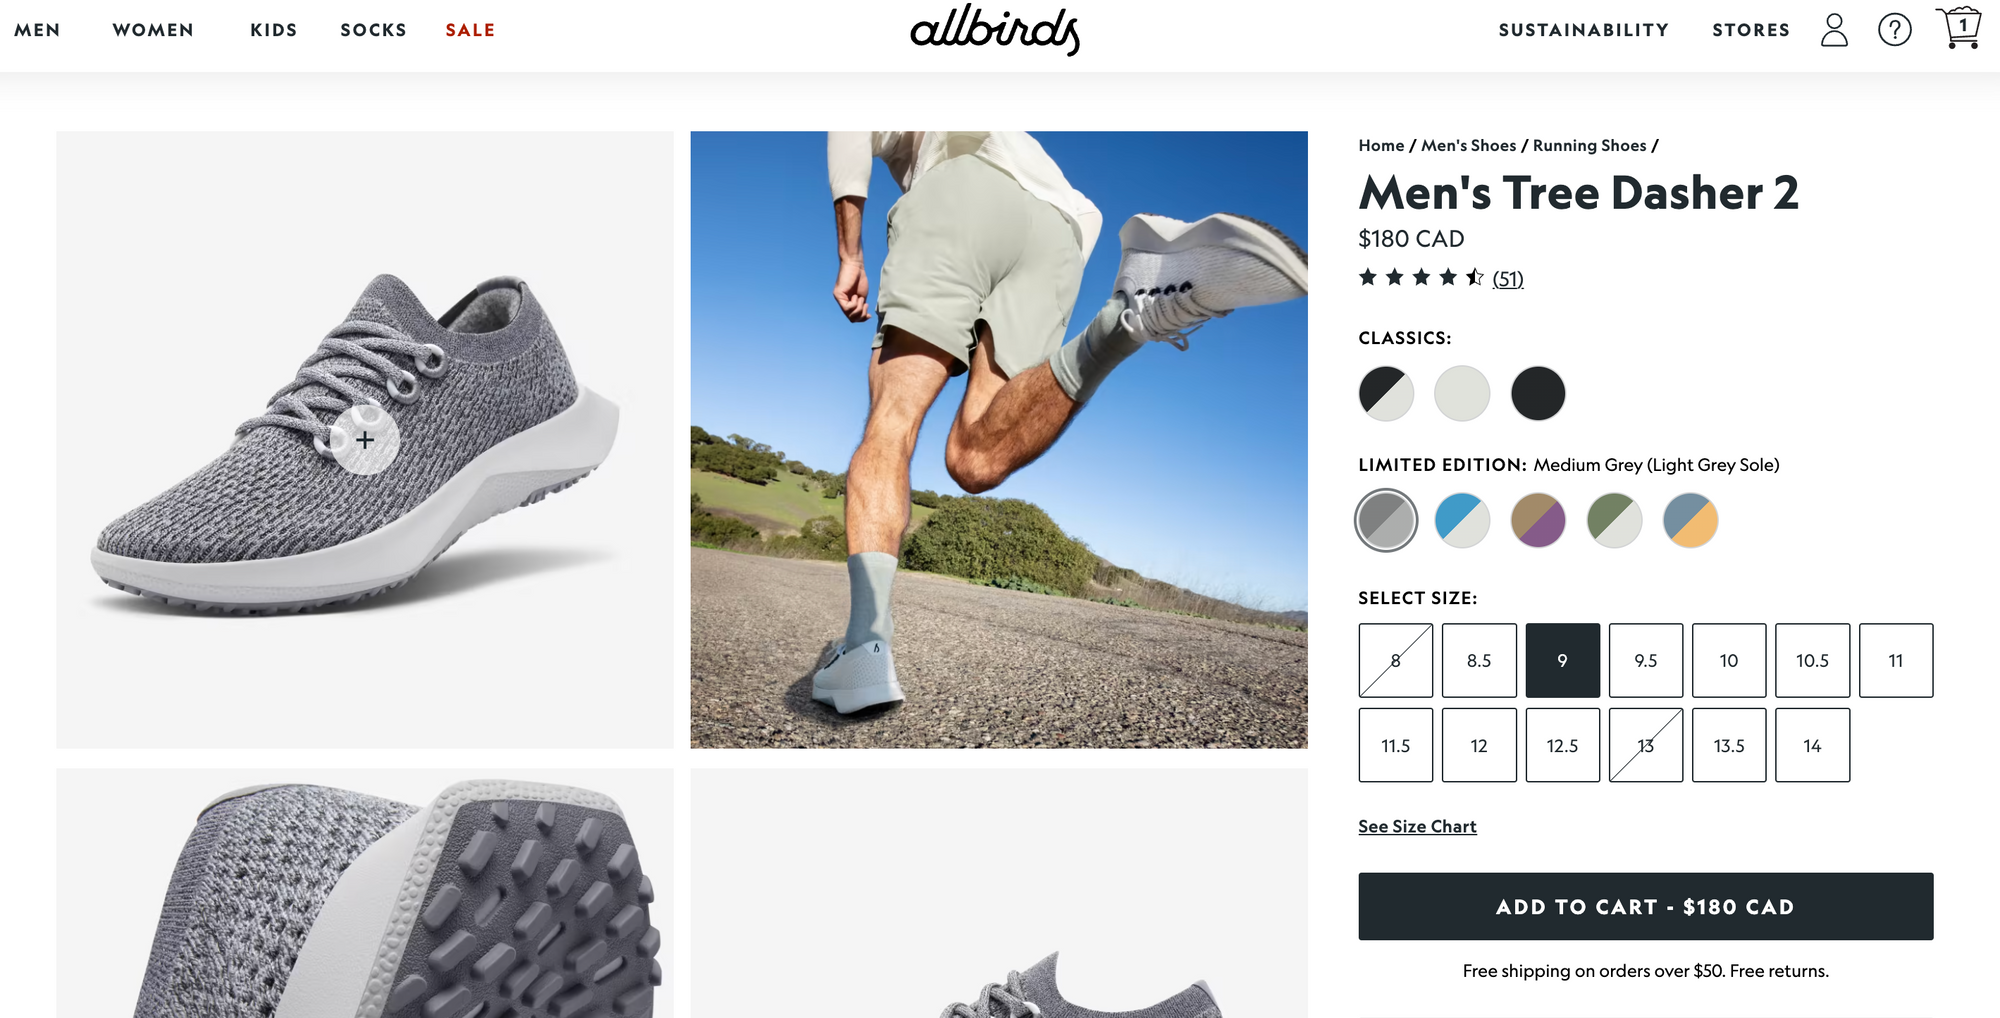 Allbirds shows pricing on their CTA button to make the purchase process more transparent and easy